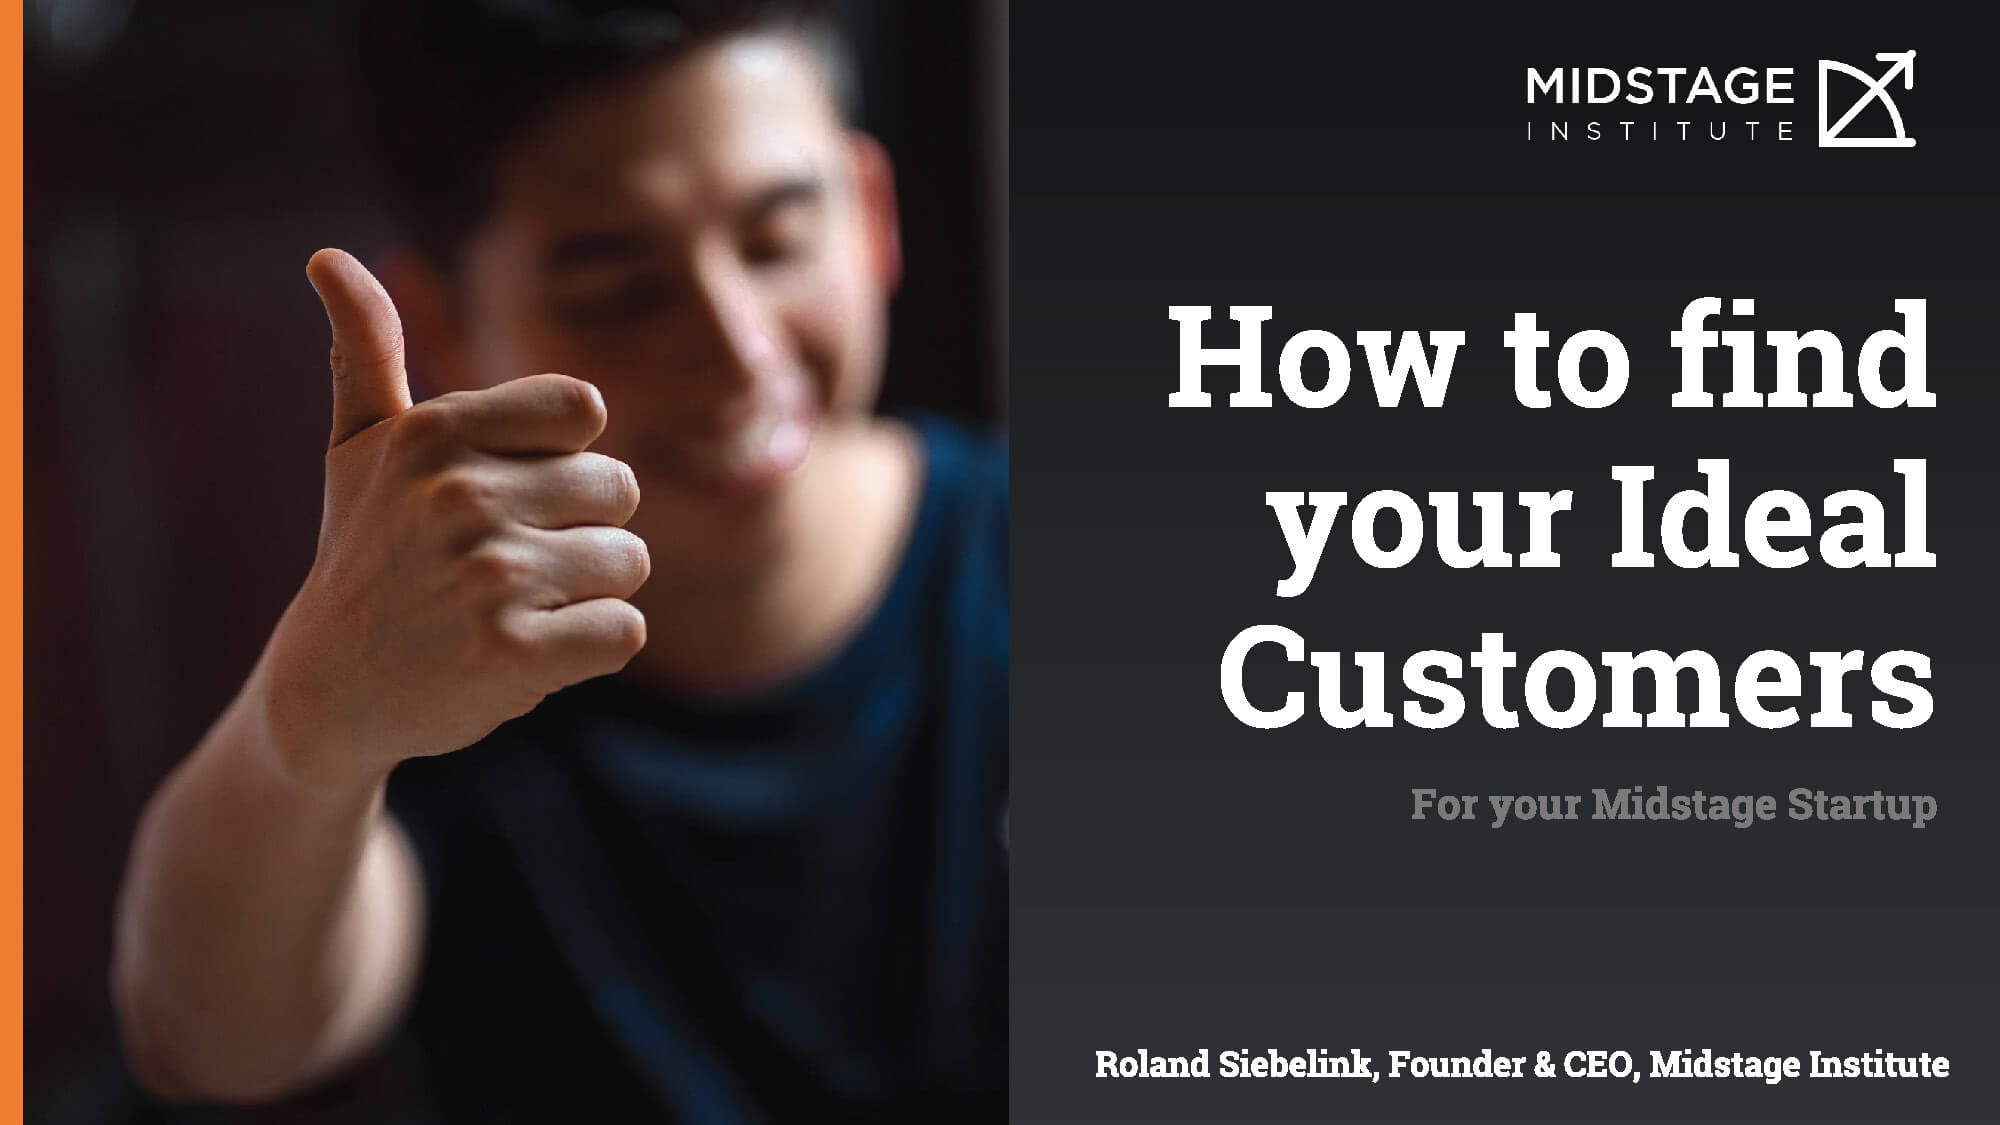 How to Find Your Ideal Customers Midstage Institute Founder & CEO Roland Siebelink